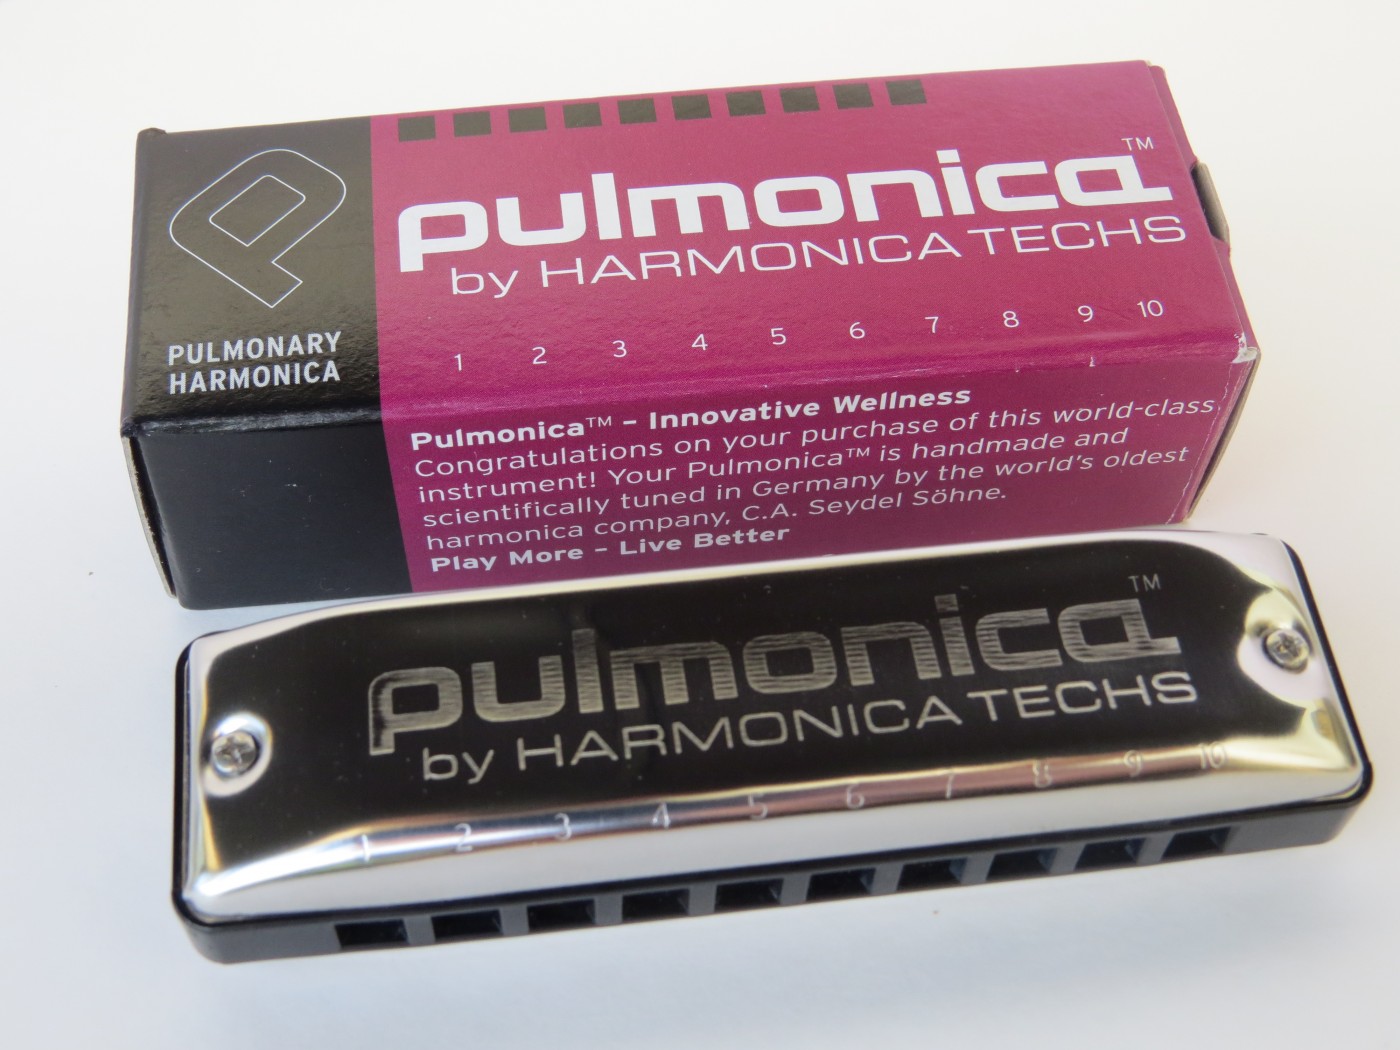 Pulmonica Harmonica Helps Patients Manage Asthma, COPD According To Experts